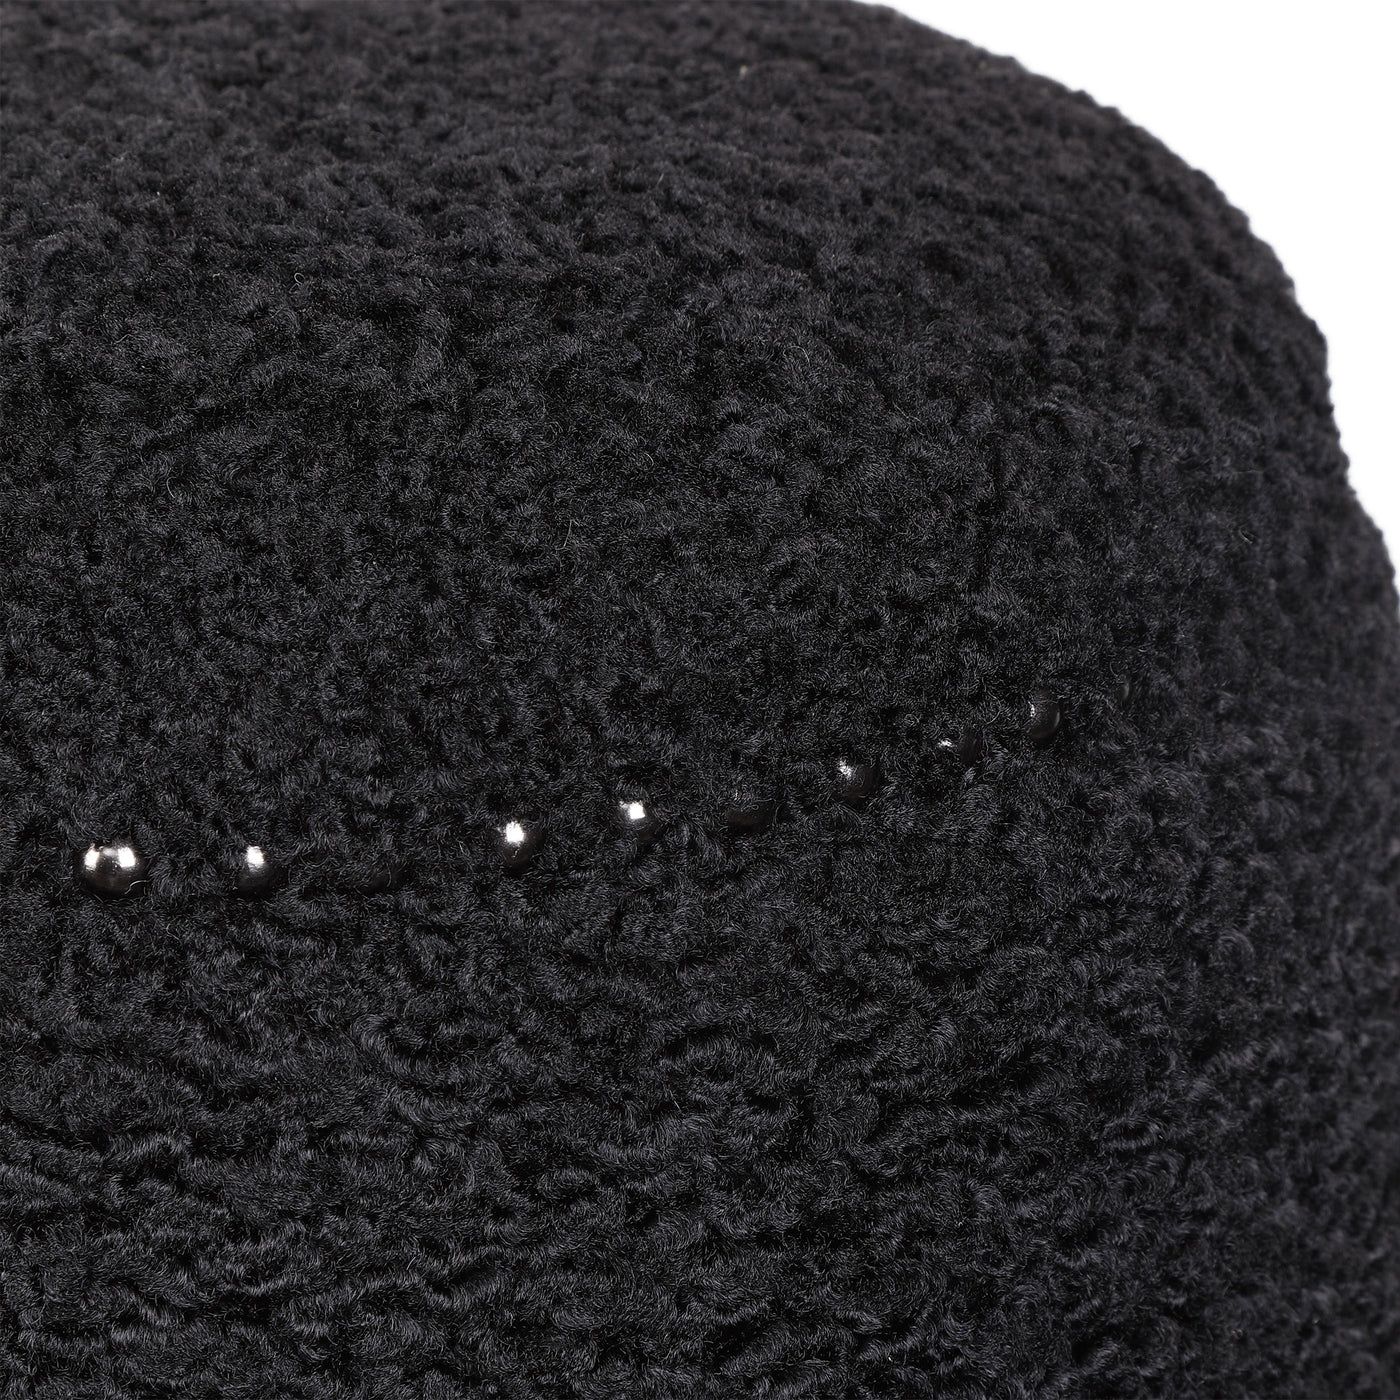 This Plush Ottoman Is Covered In A Luxurious Faux Black Shearling With Black Nickel Nail Head Details. Versatile And Styli...